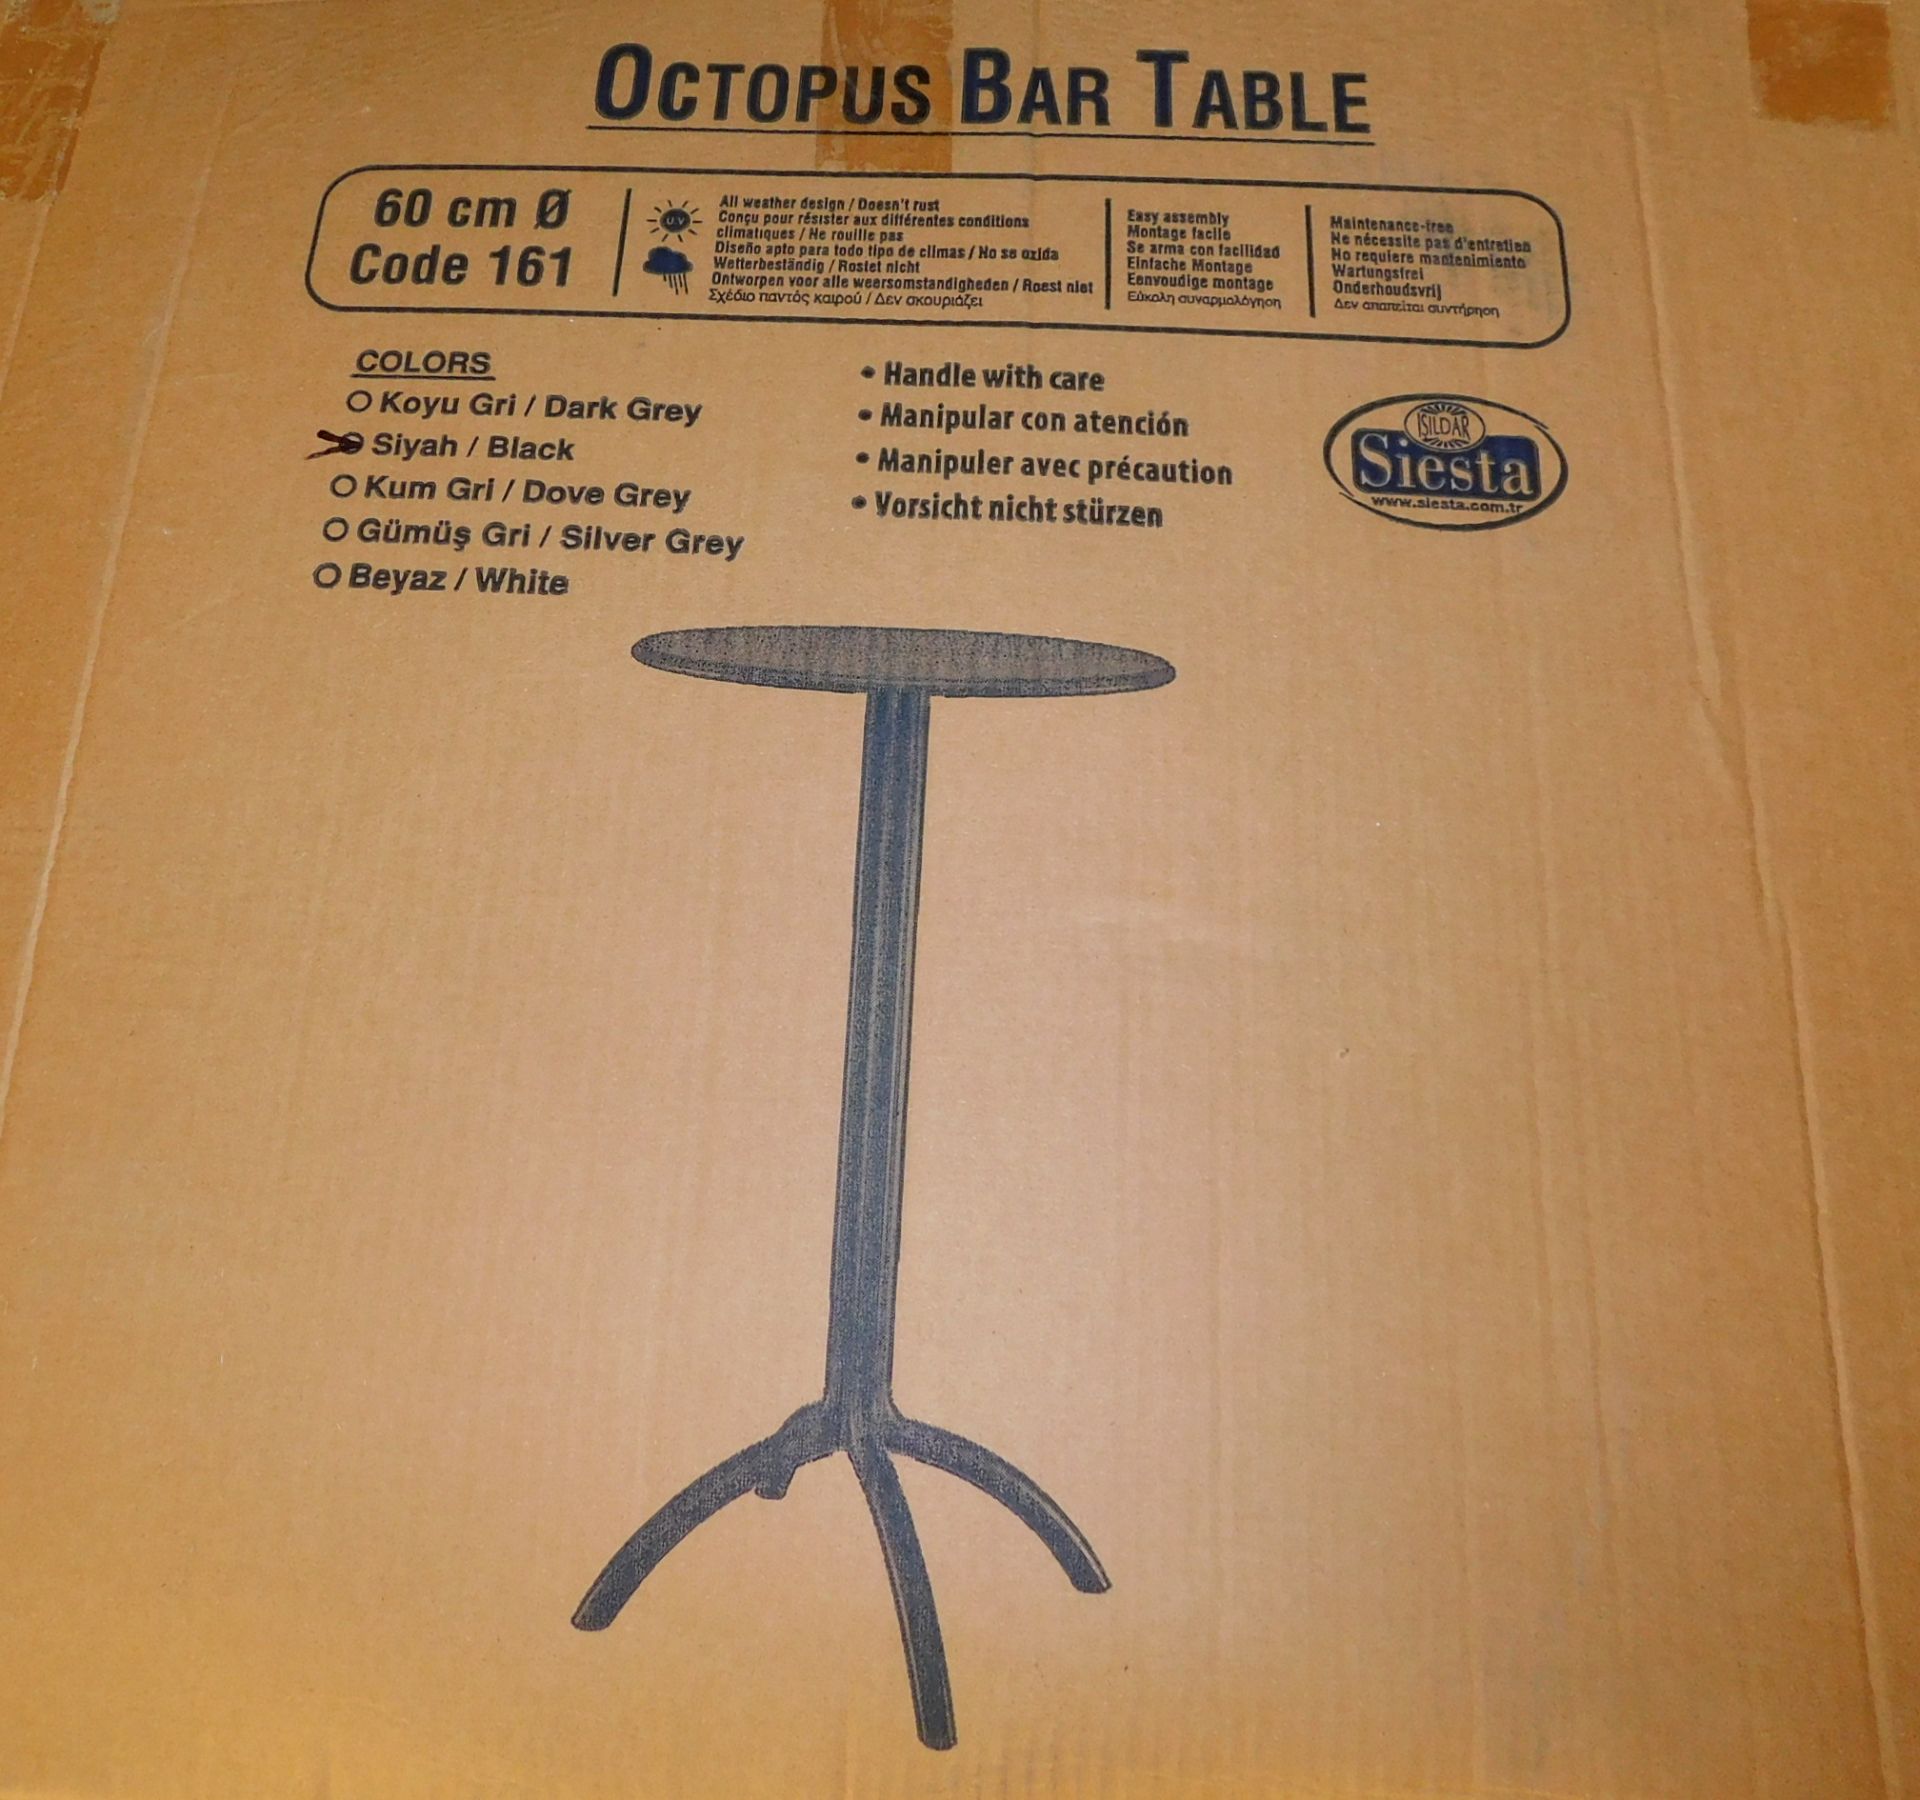 18 Octopus Bar Tables (Located Huntingdon, See General Notes for More Details)